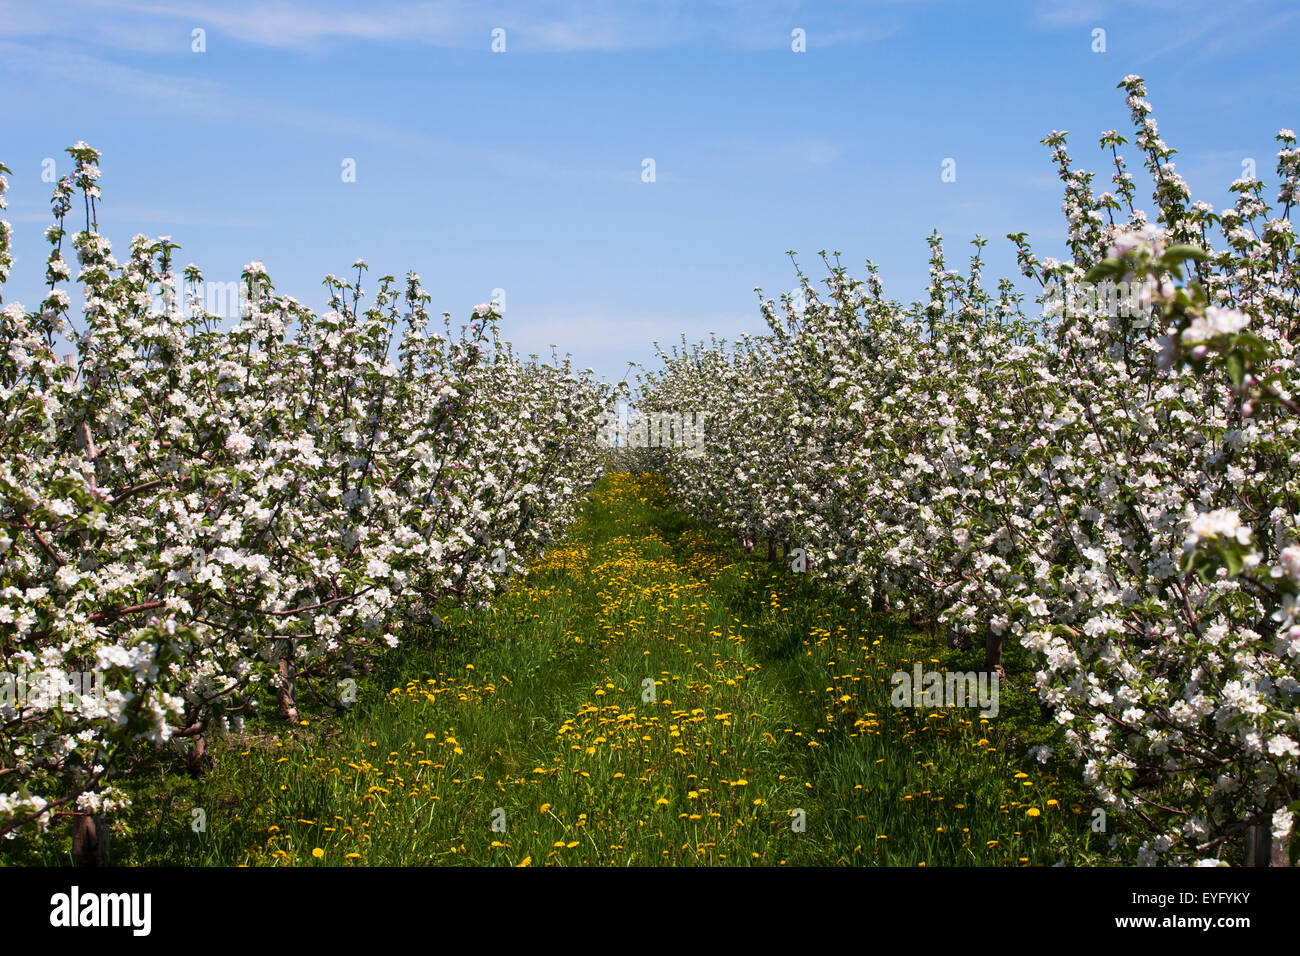 Apple orchard, blossoms, late spring, St. Paul d'Abbotsford, Eastern Townships, Quebec, Canada Stock Photo